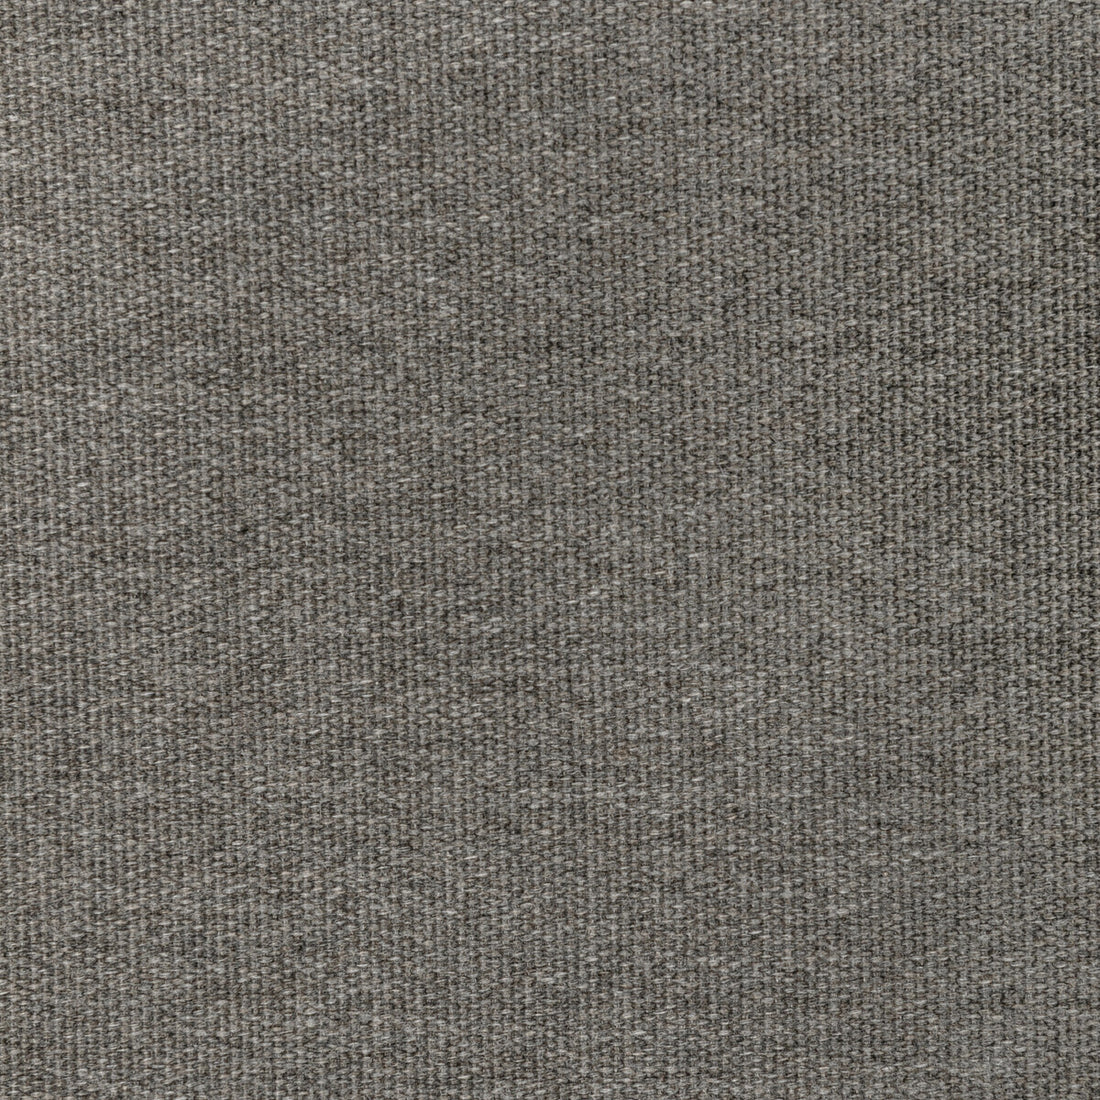 Kravet Basics fabric in 36827-52 color - pattern 36827.52.0 - by Kravet Basics in the Indoor / Outdoor collection